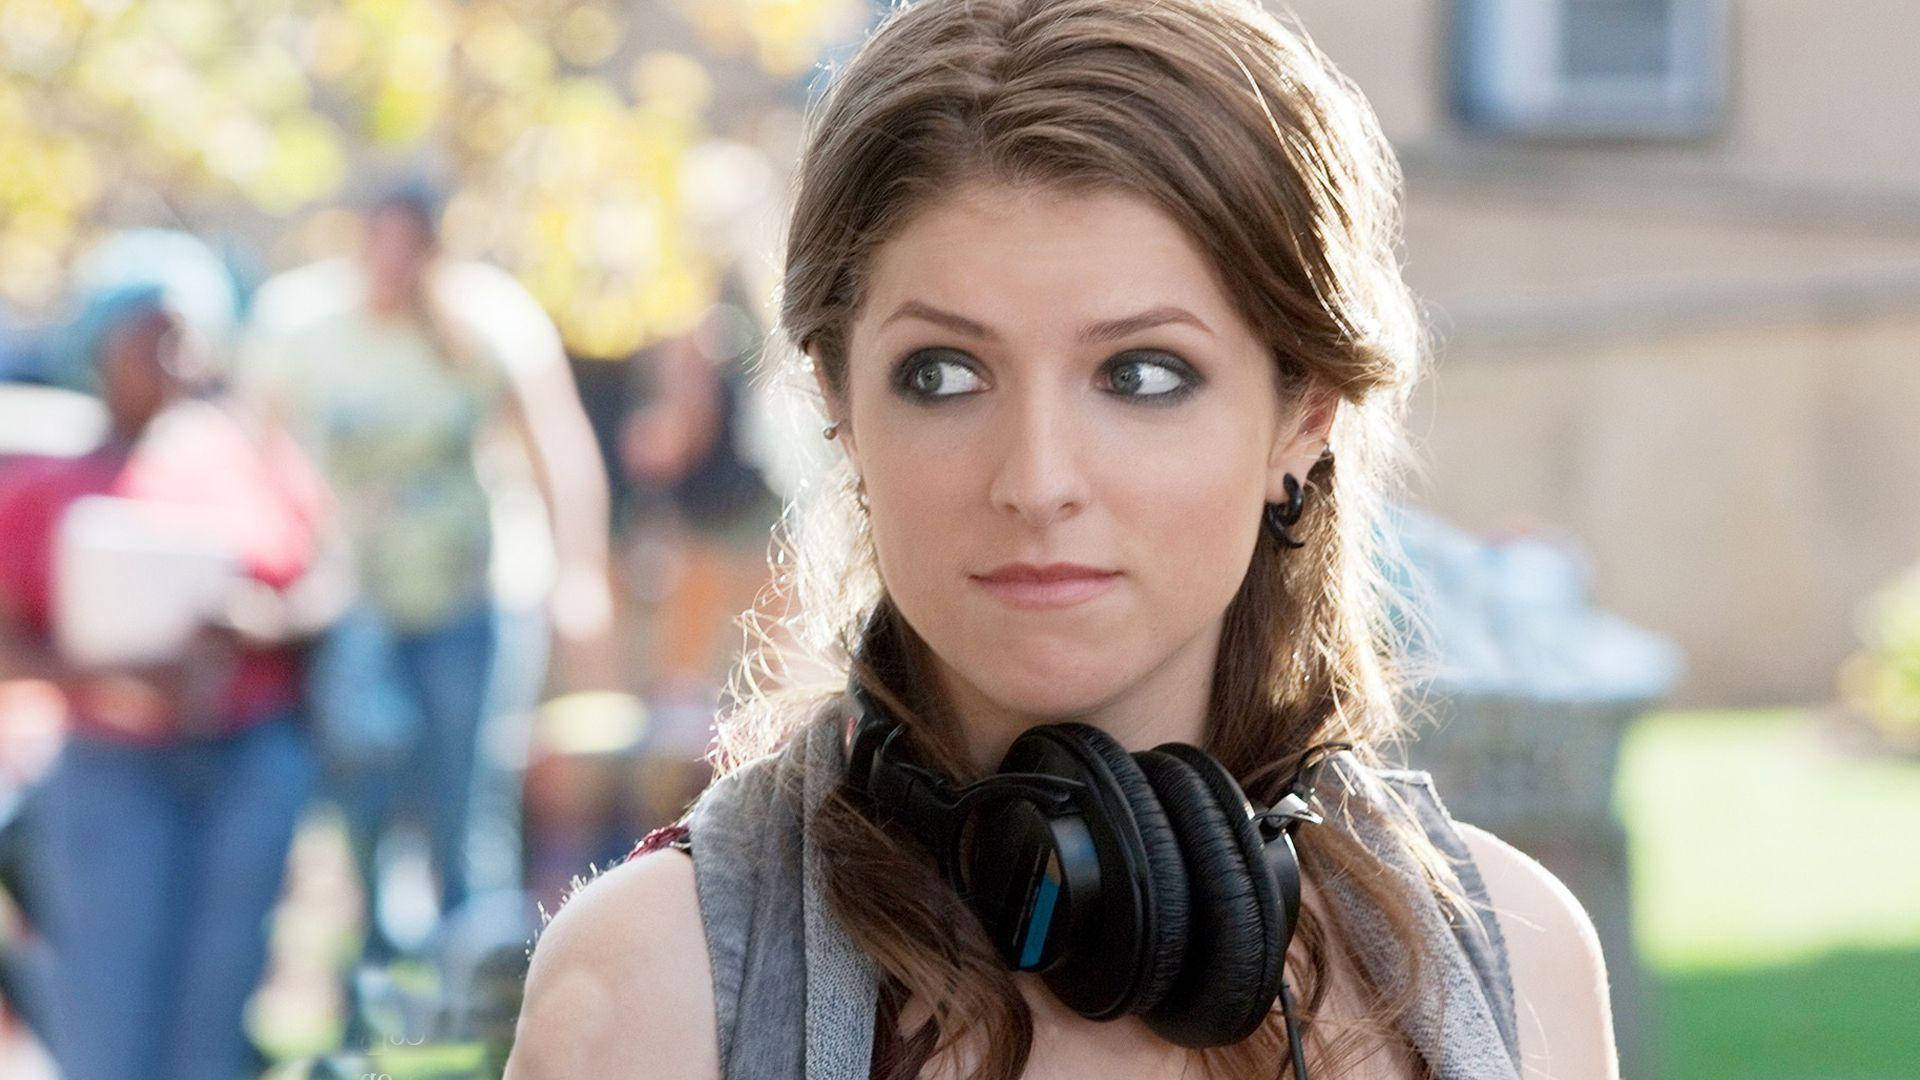 Anna Kendrick As Beca In Pitch Perfect Background